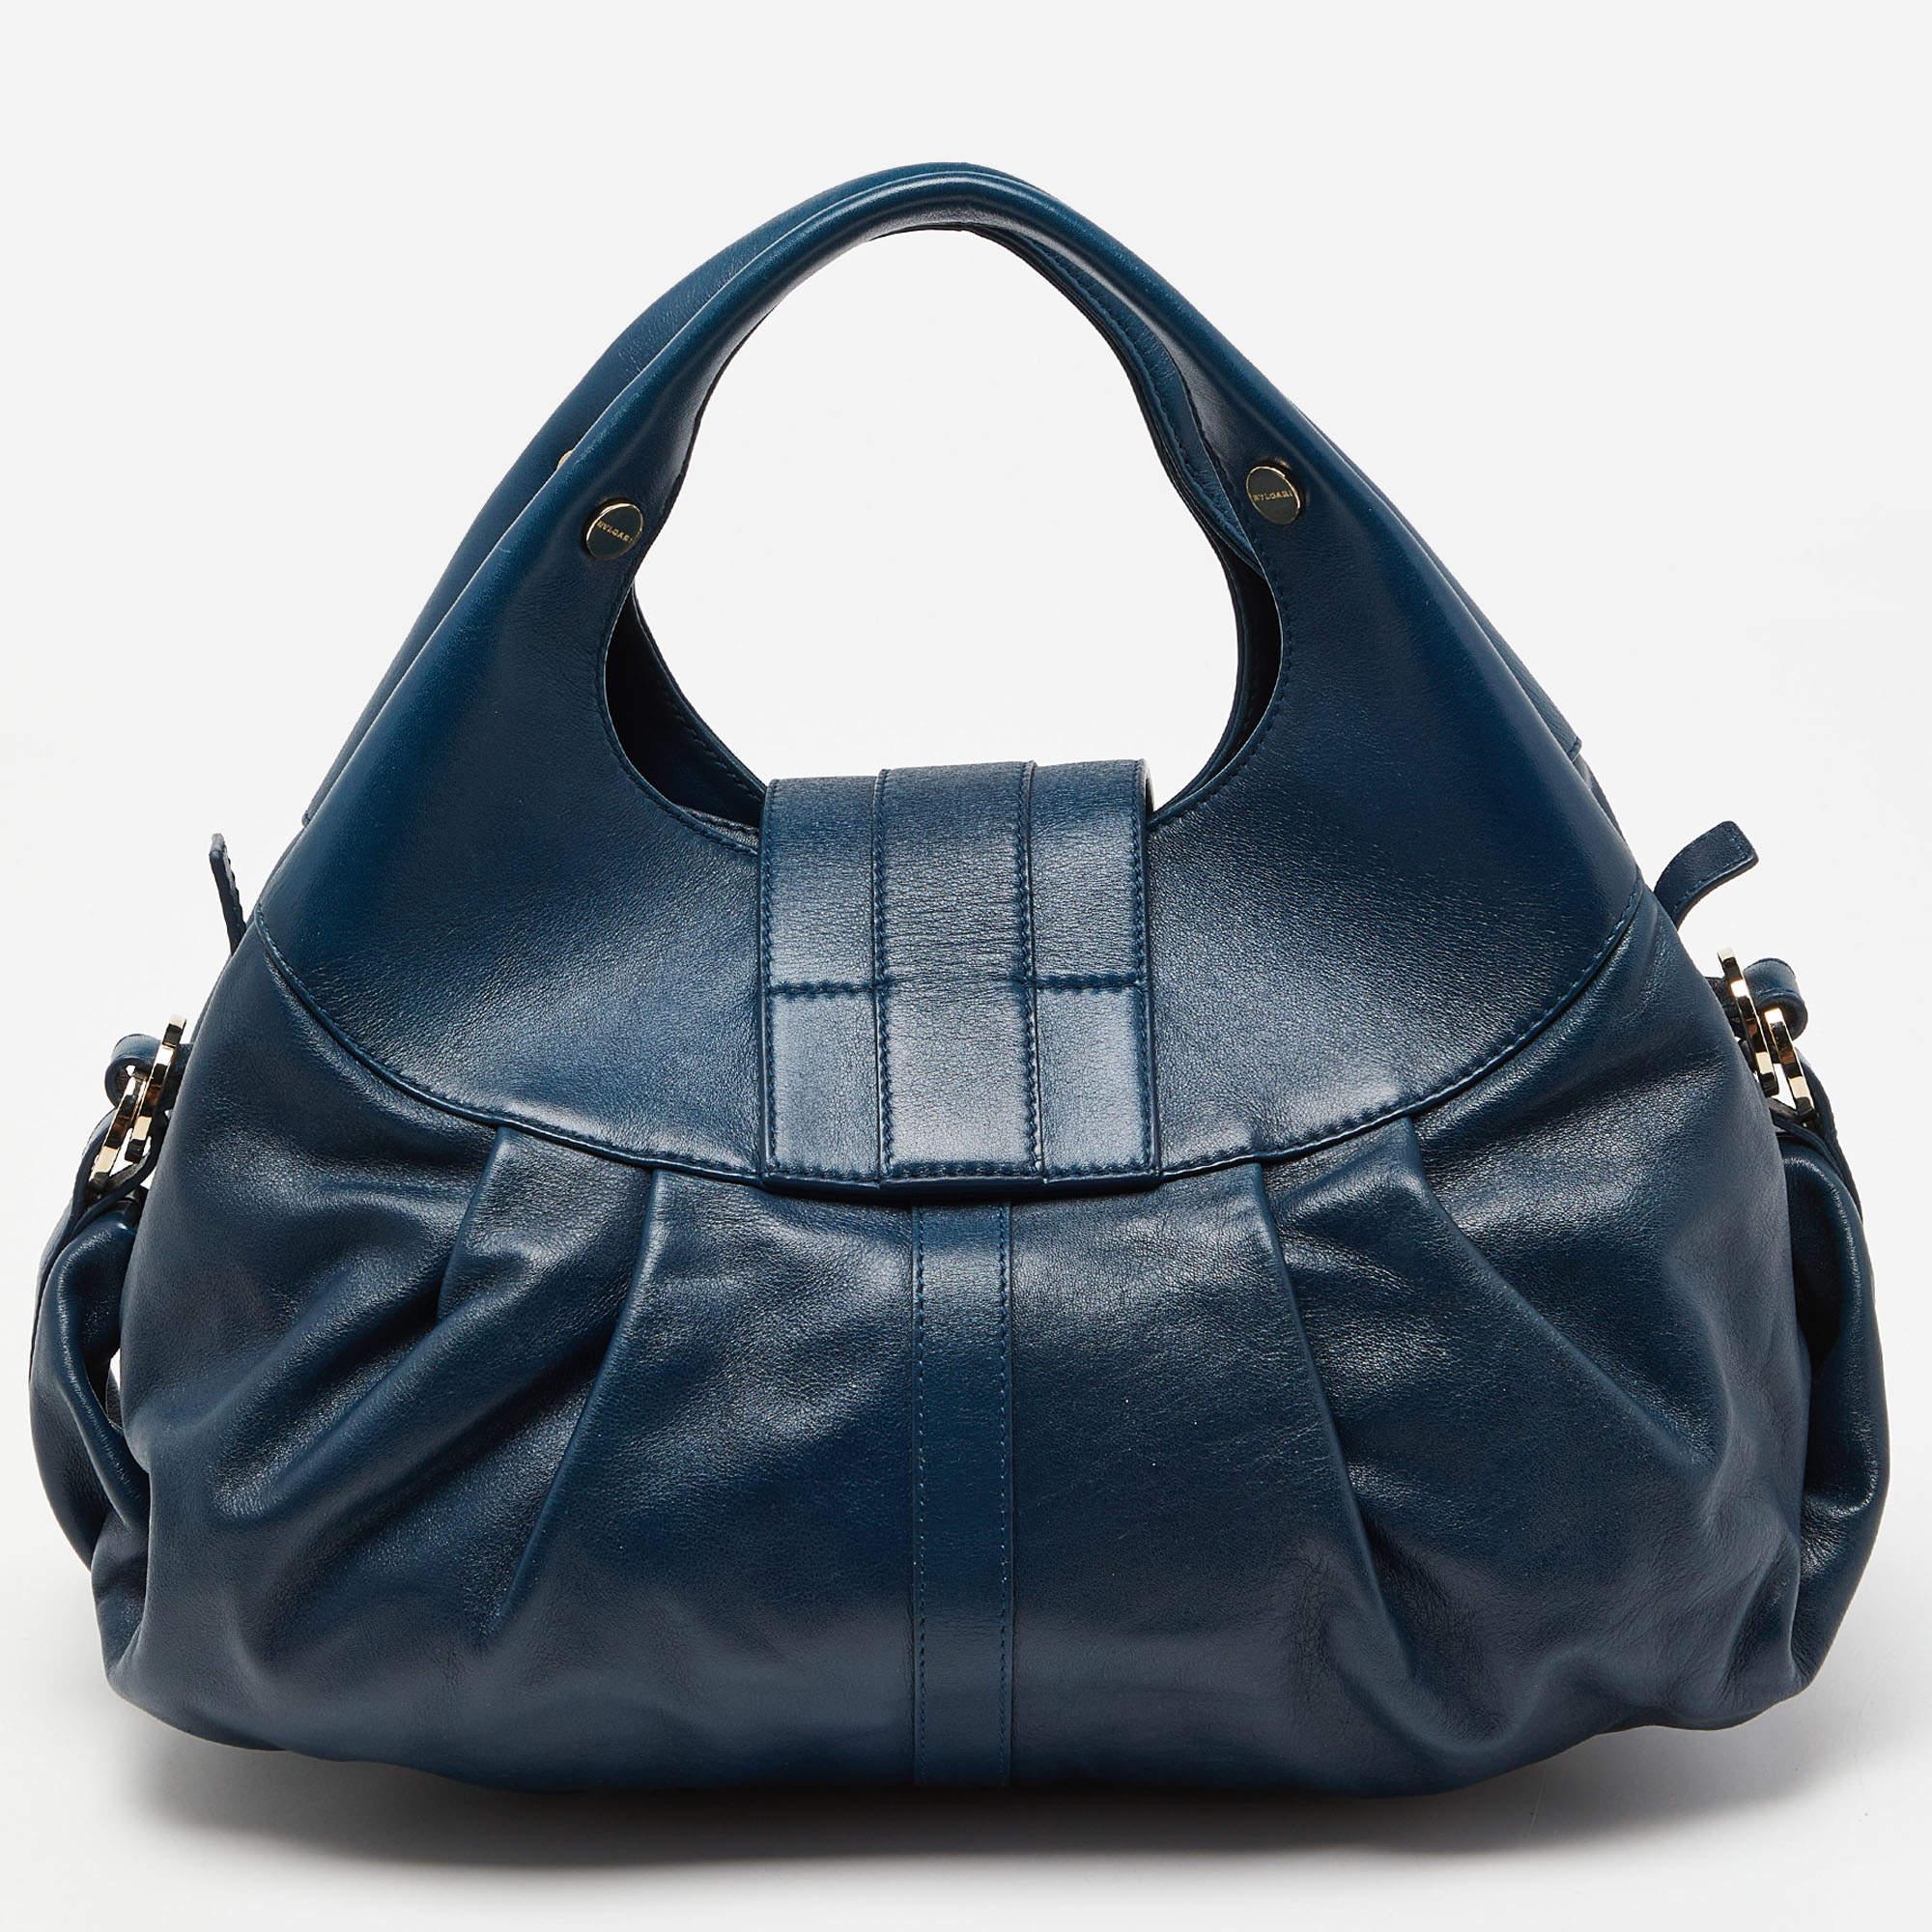 A known style from the house of Bvlgari, Chandra is loved for its comfortable silhouette and elegant appeal. This teal-hued one is meticulously crafted from leather and has the signature slouchy shape with broad pleats and dual top handles. The bag